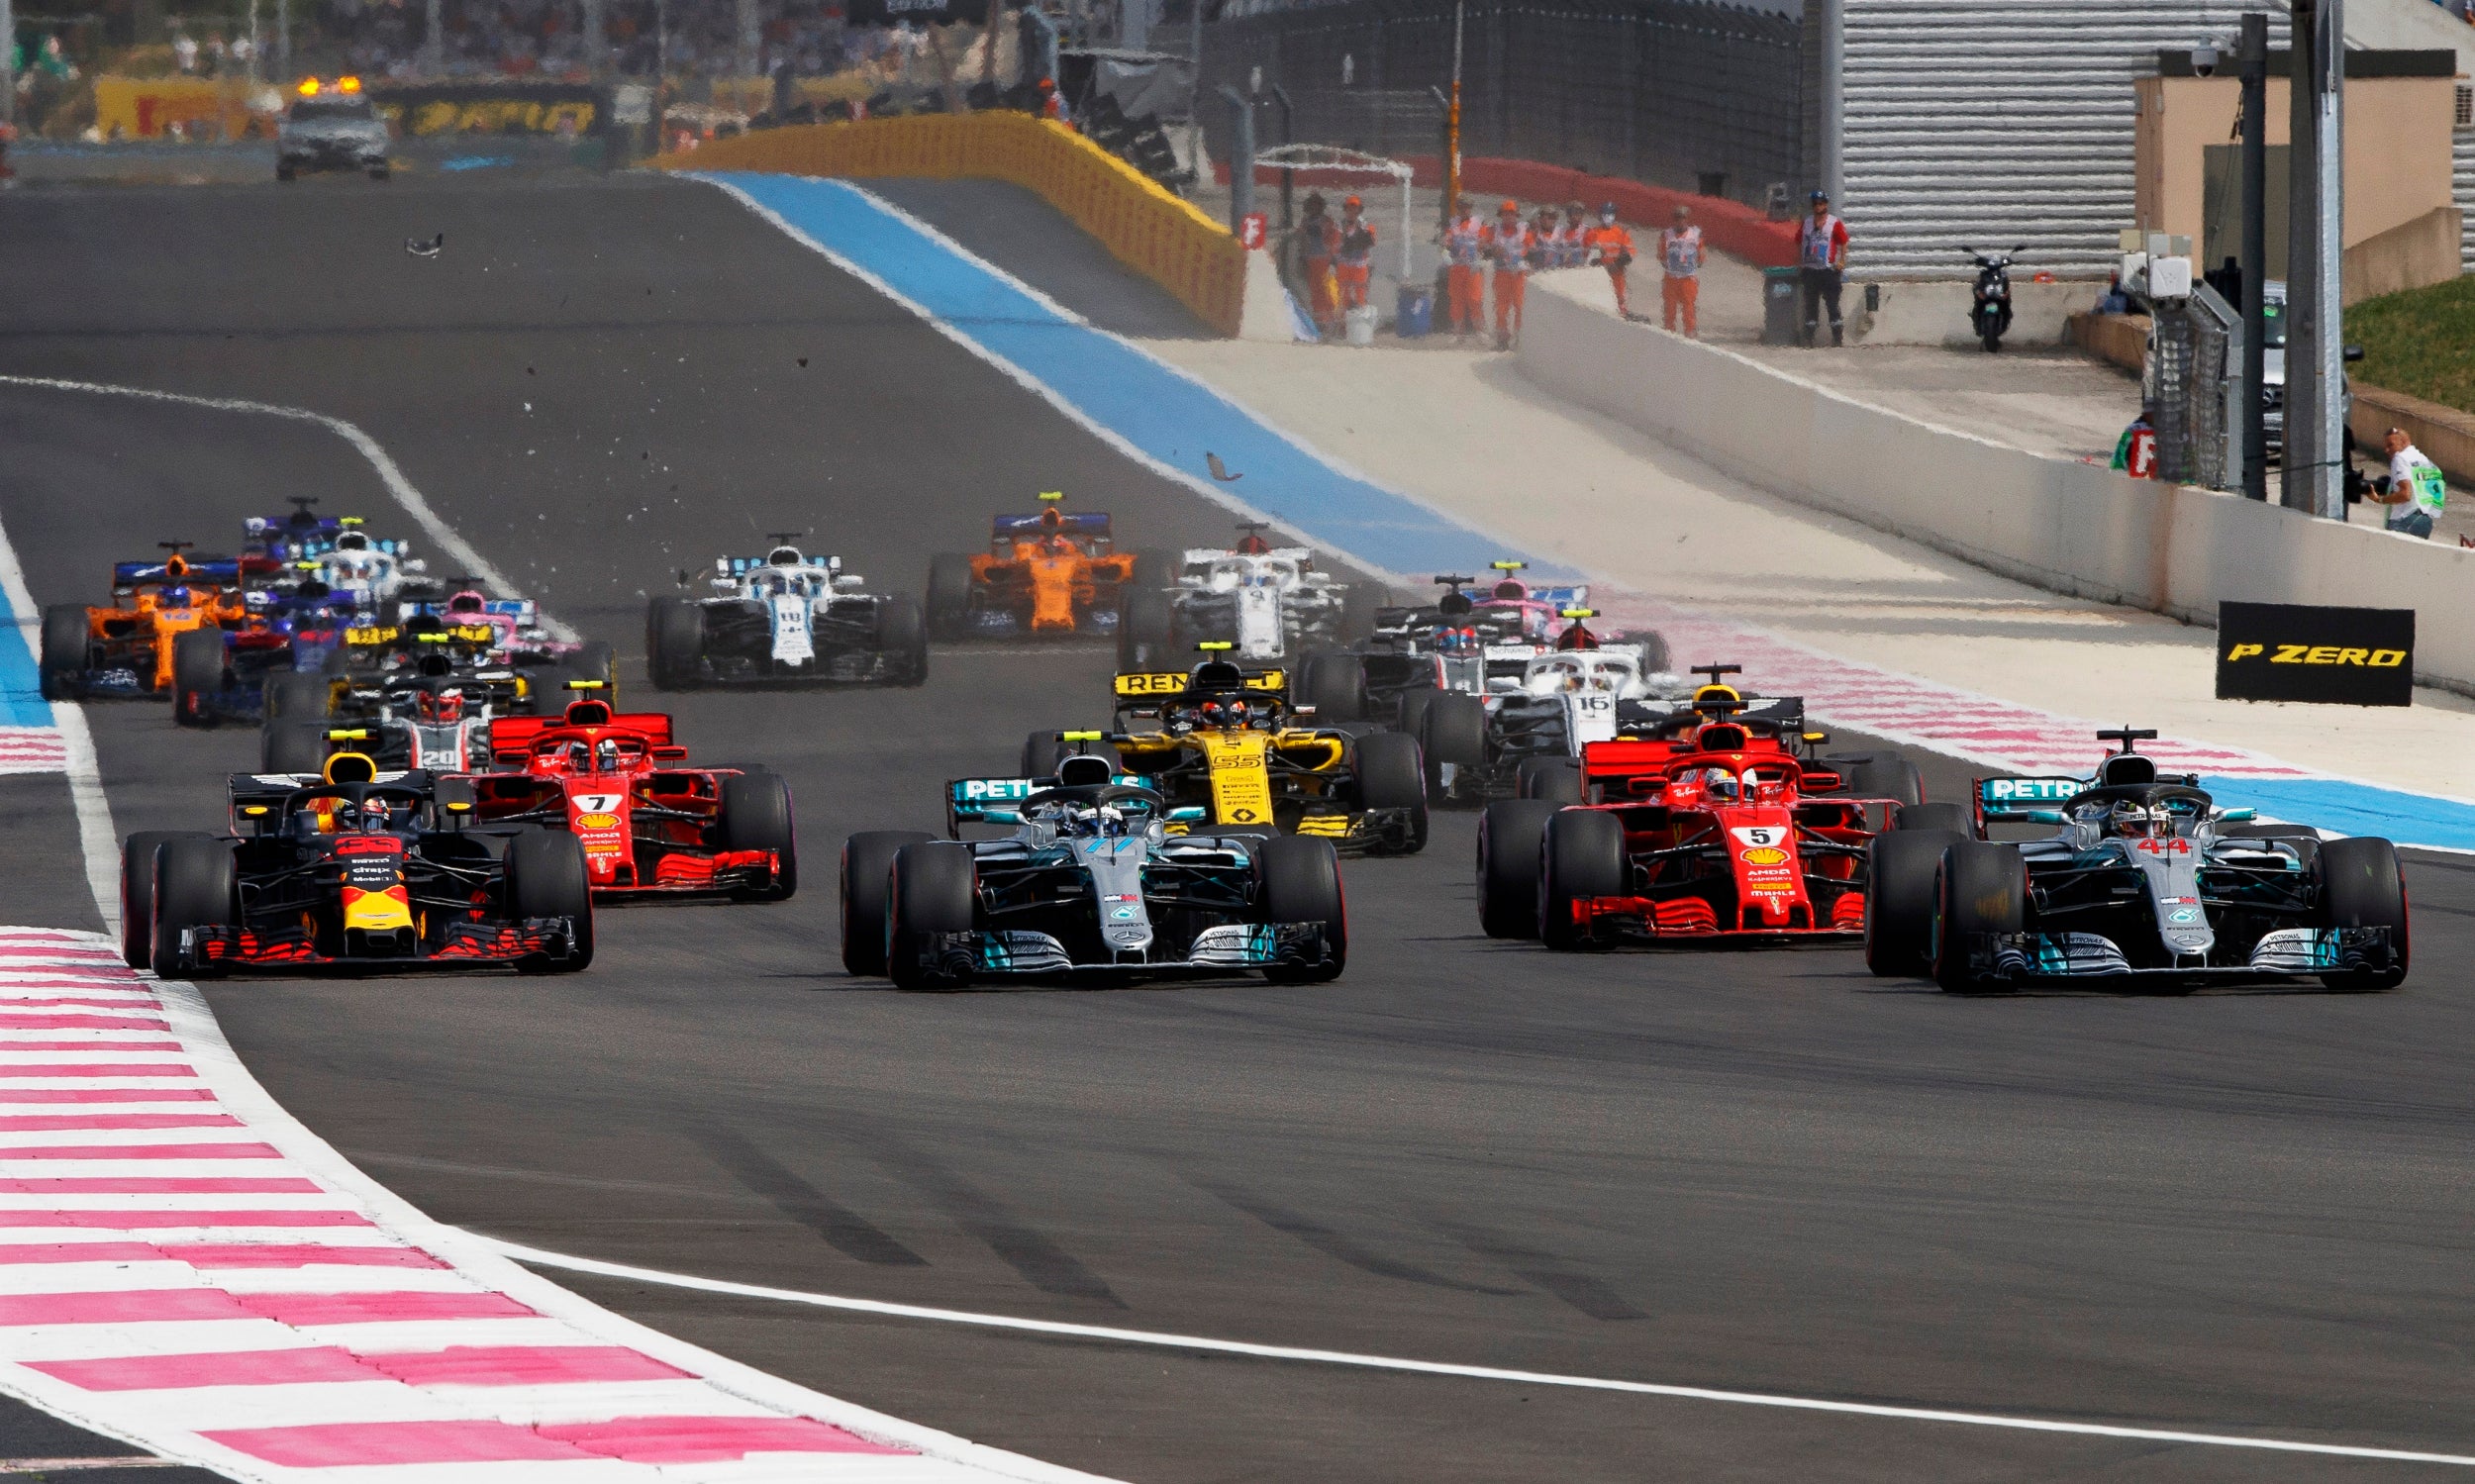 Championship rival Vettel took himself and Valtteri Bottas out at the first corner in France